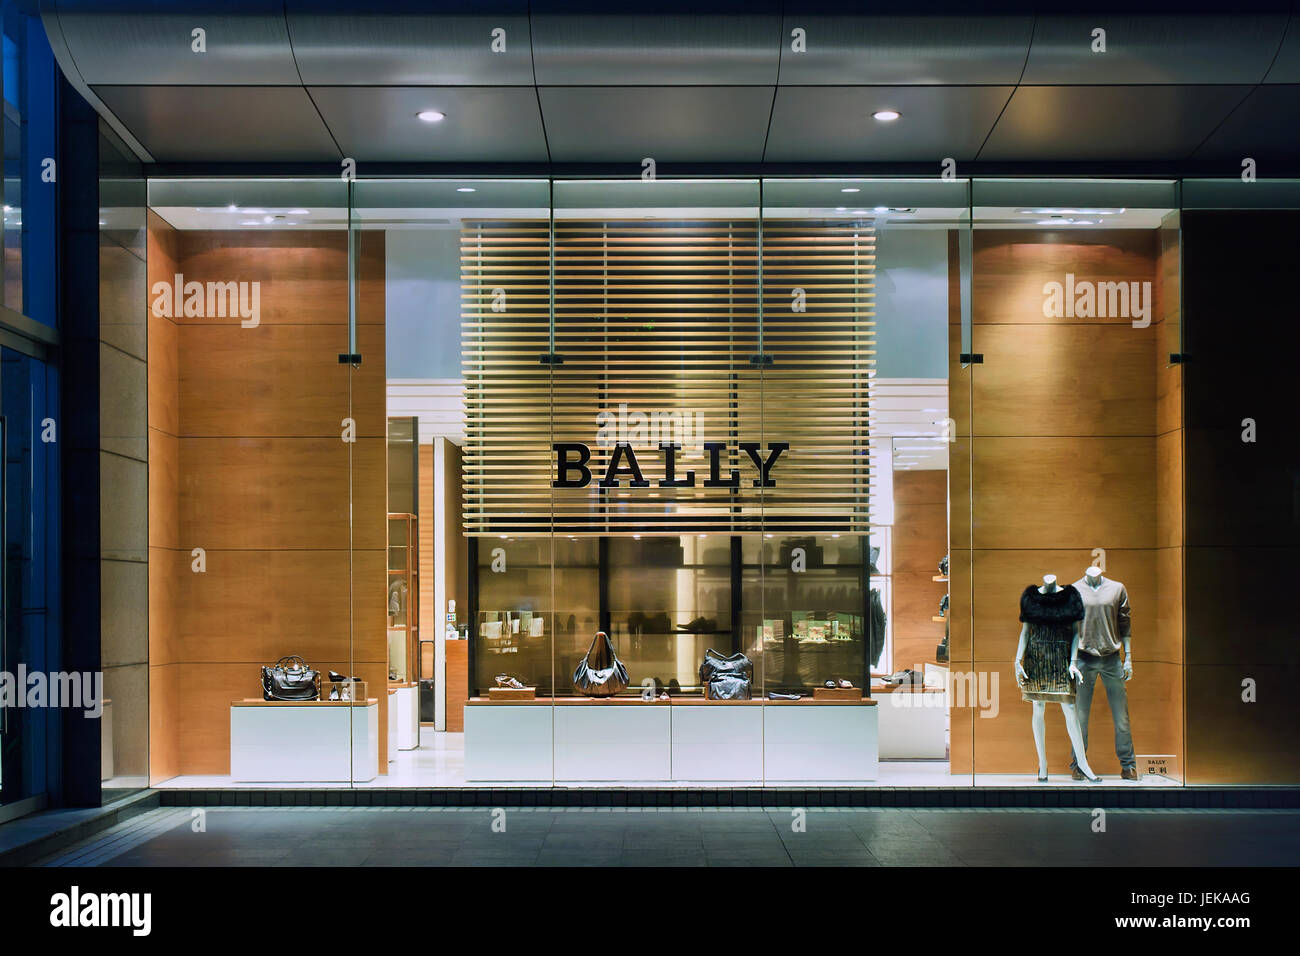 Bally Shop High Resolution Stock Photography and Images - Alamy